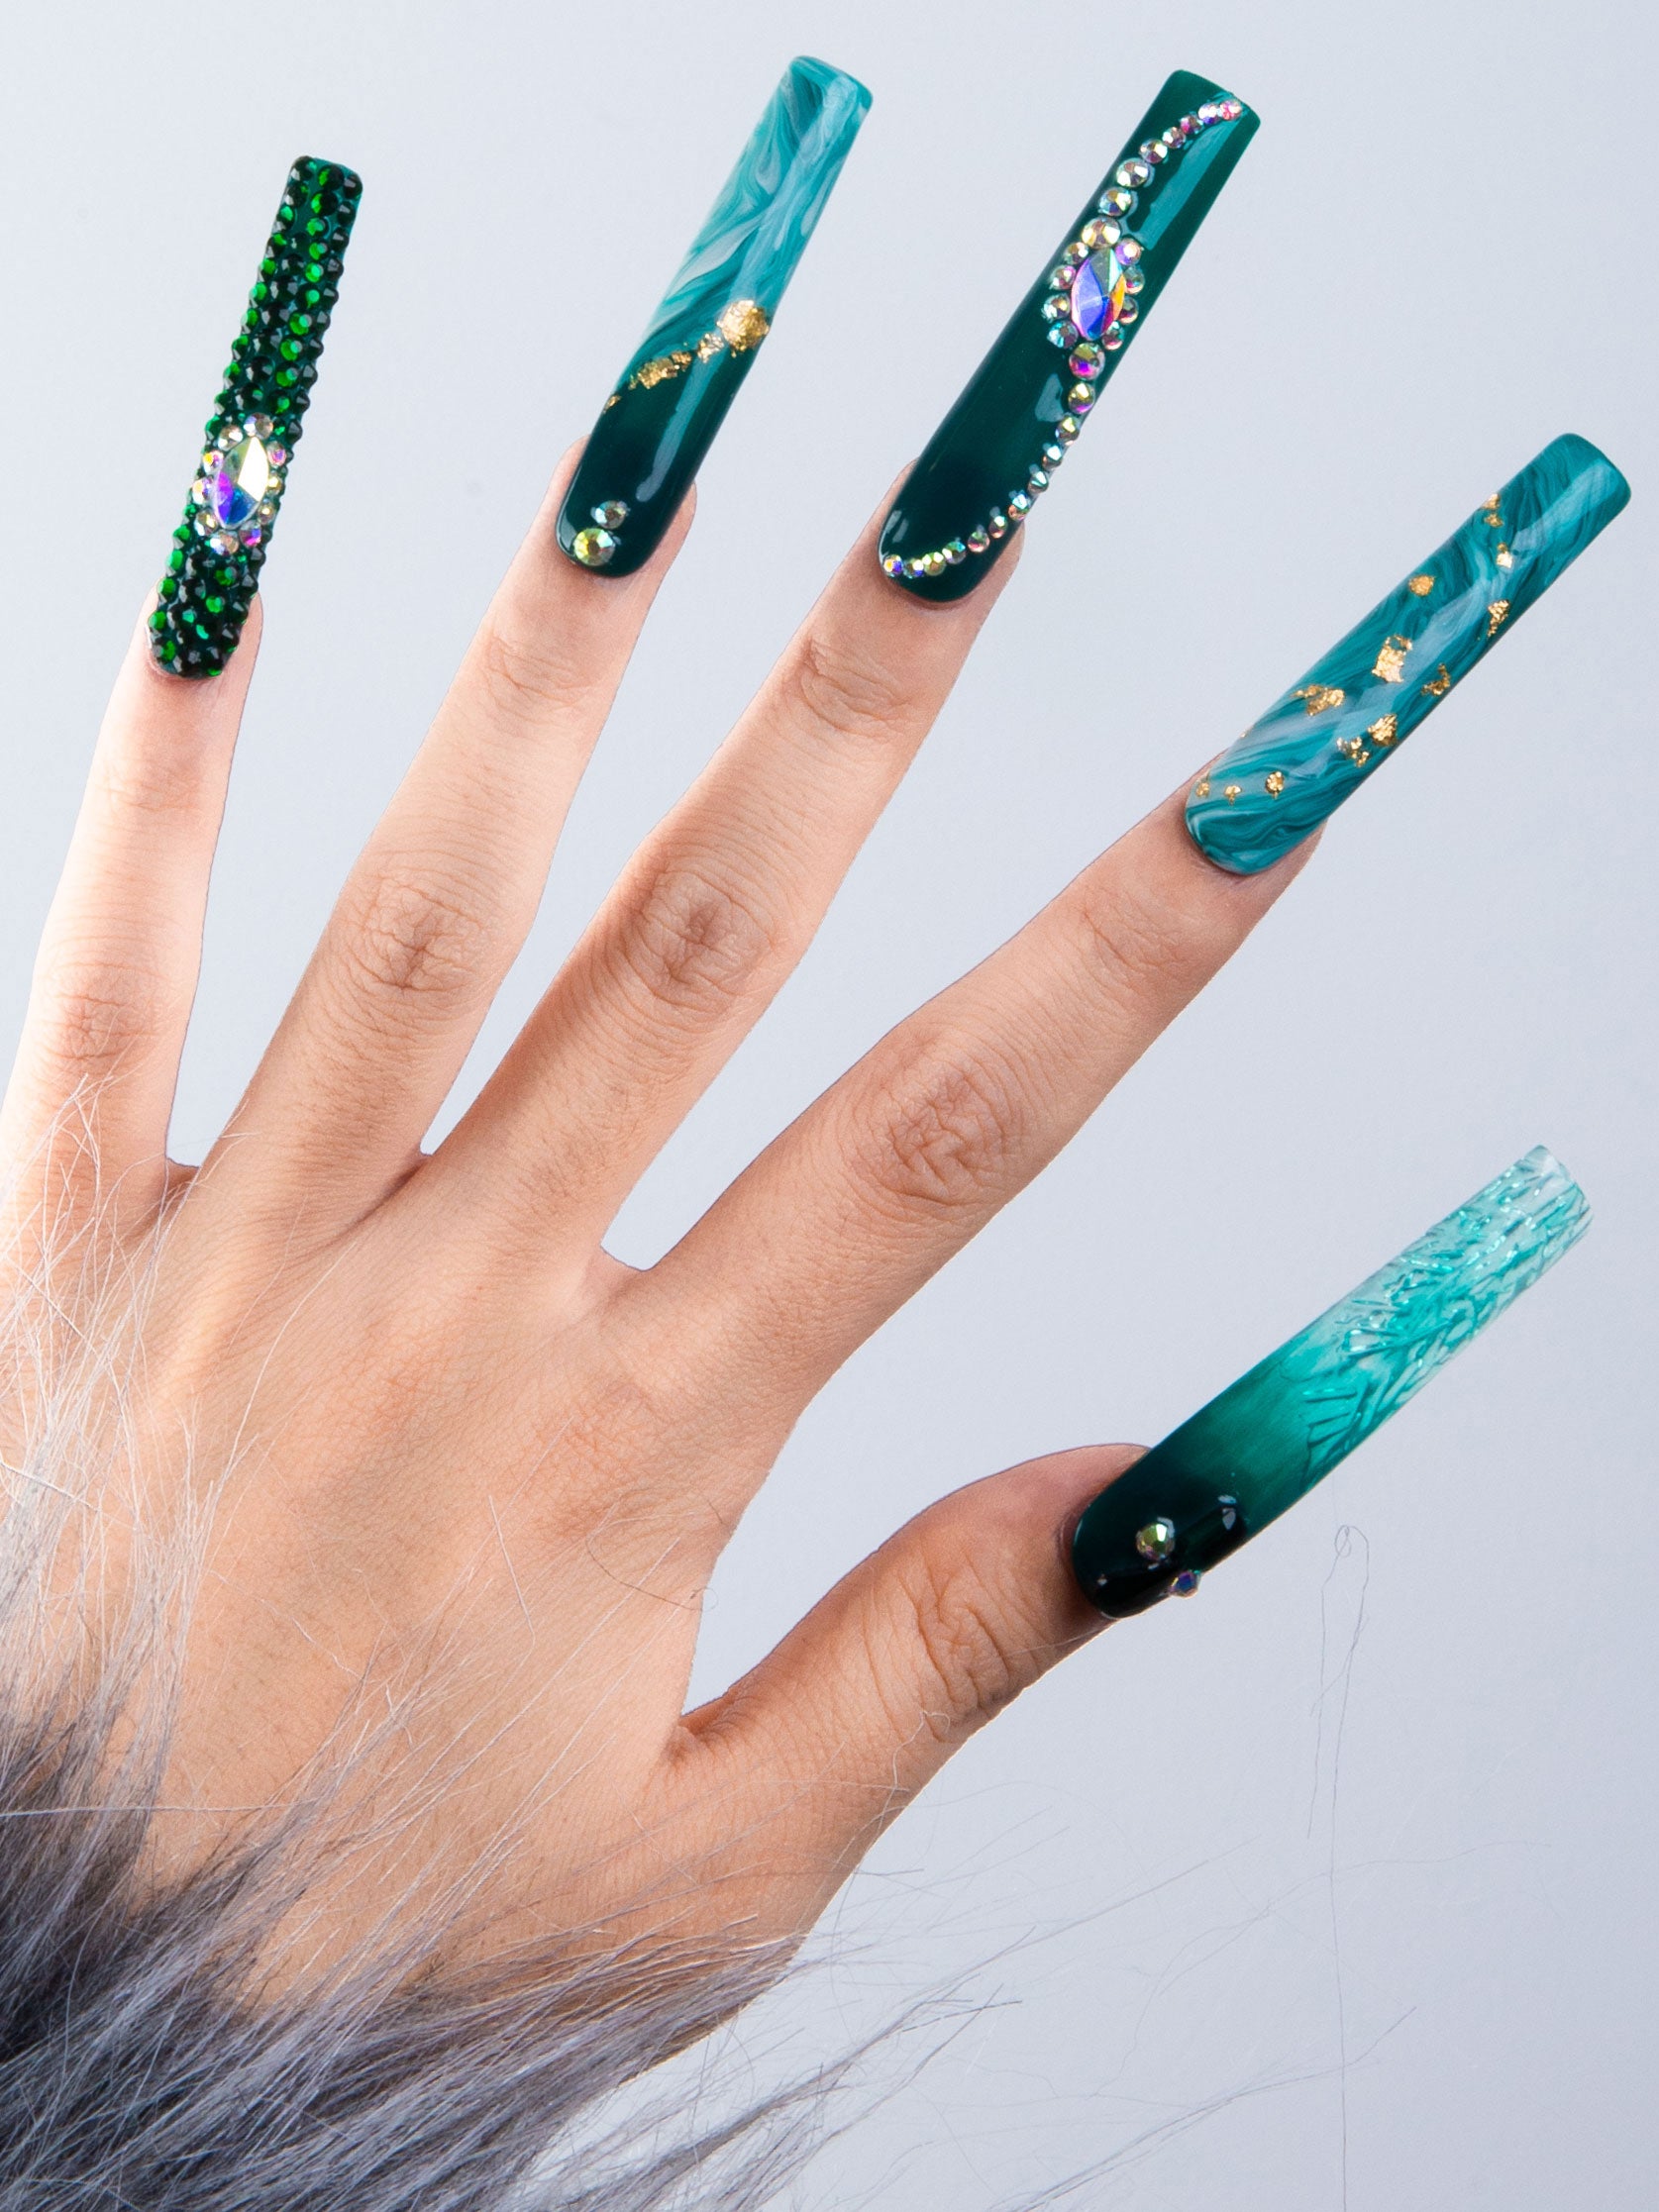 Hand with Lovful's Emerald Envy press-on nails, green square-shaped nails with intricate gold decor and green gemstones, mimicking lush foliage and forest allure.